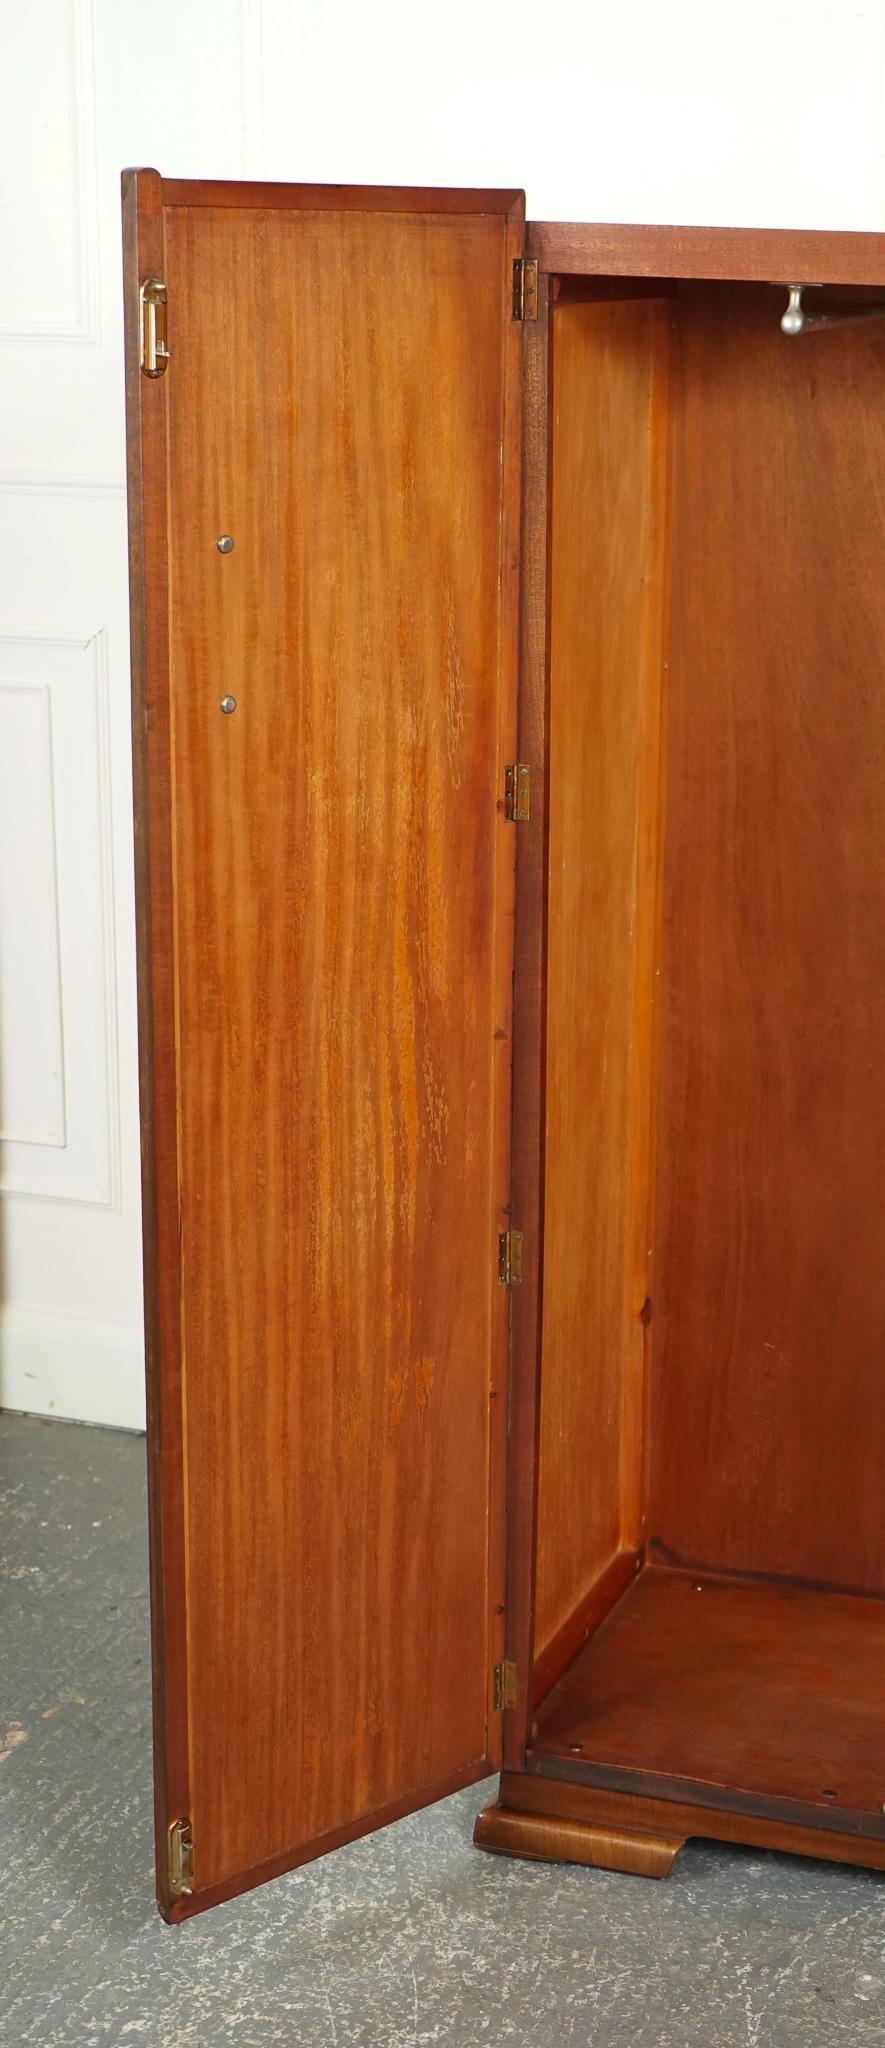 LOVELY SMALL COMPACT ART DECO BURR WALNuT WARDROBE For Sale 4